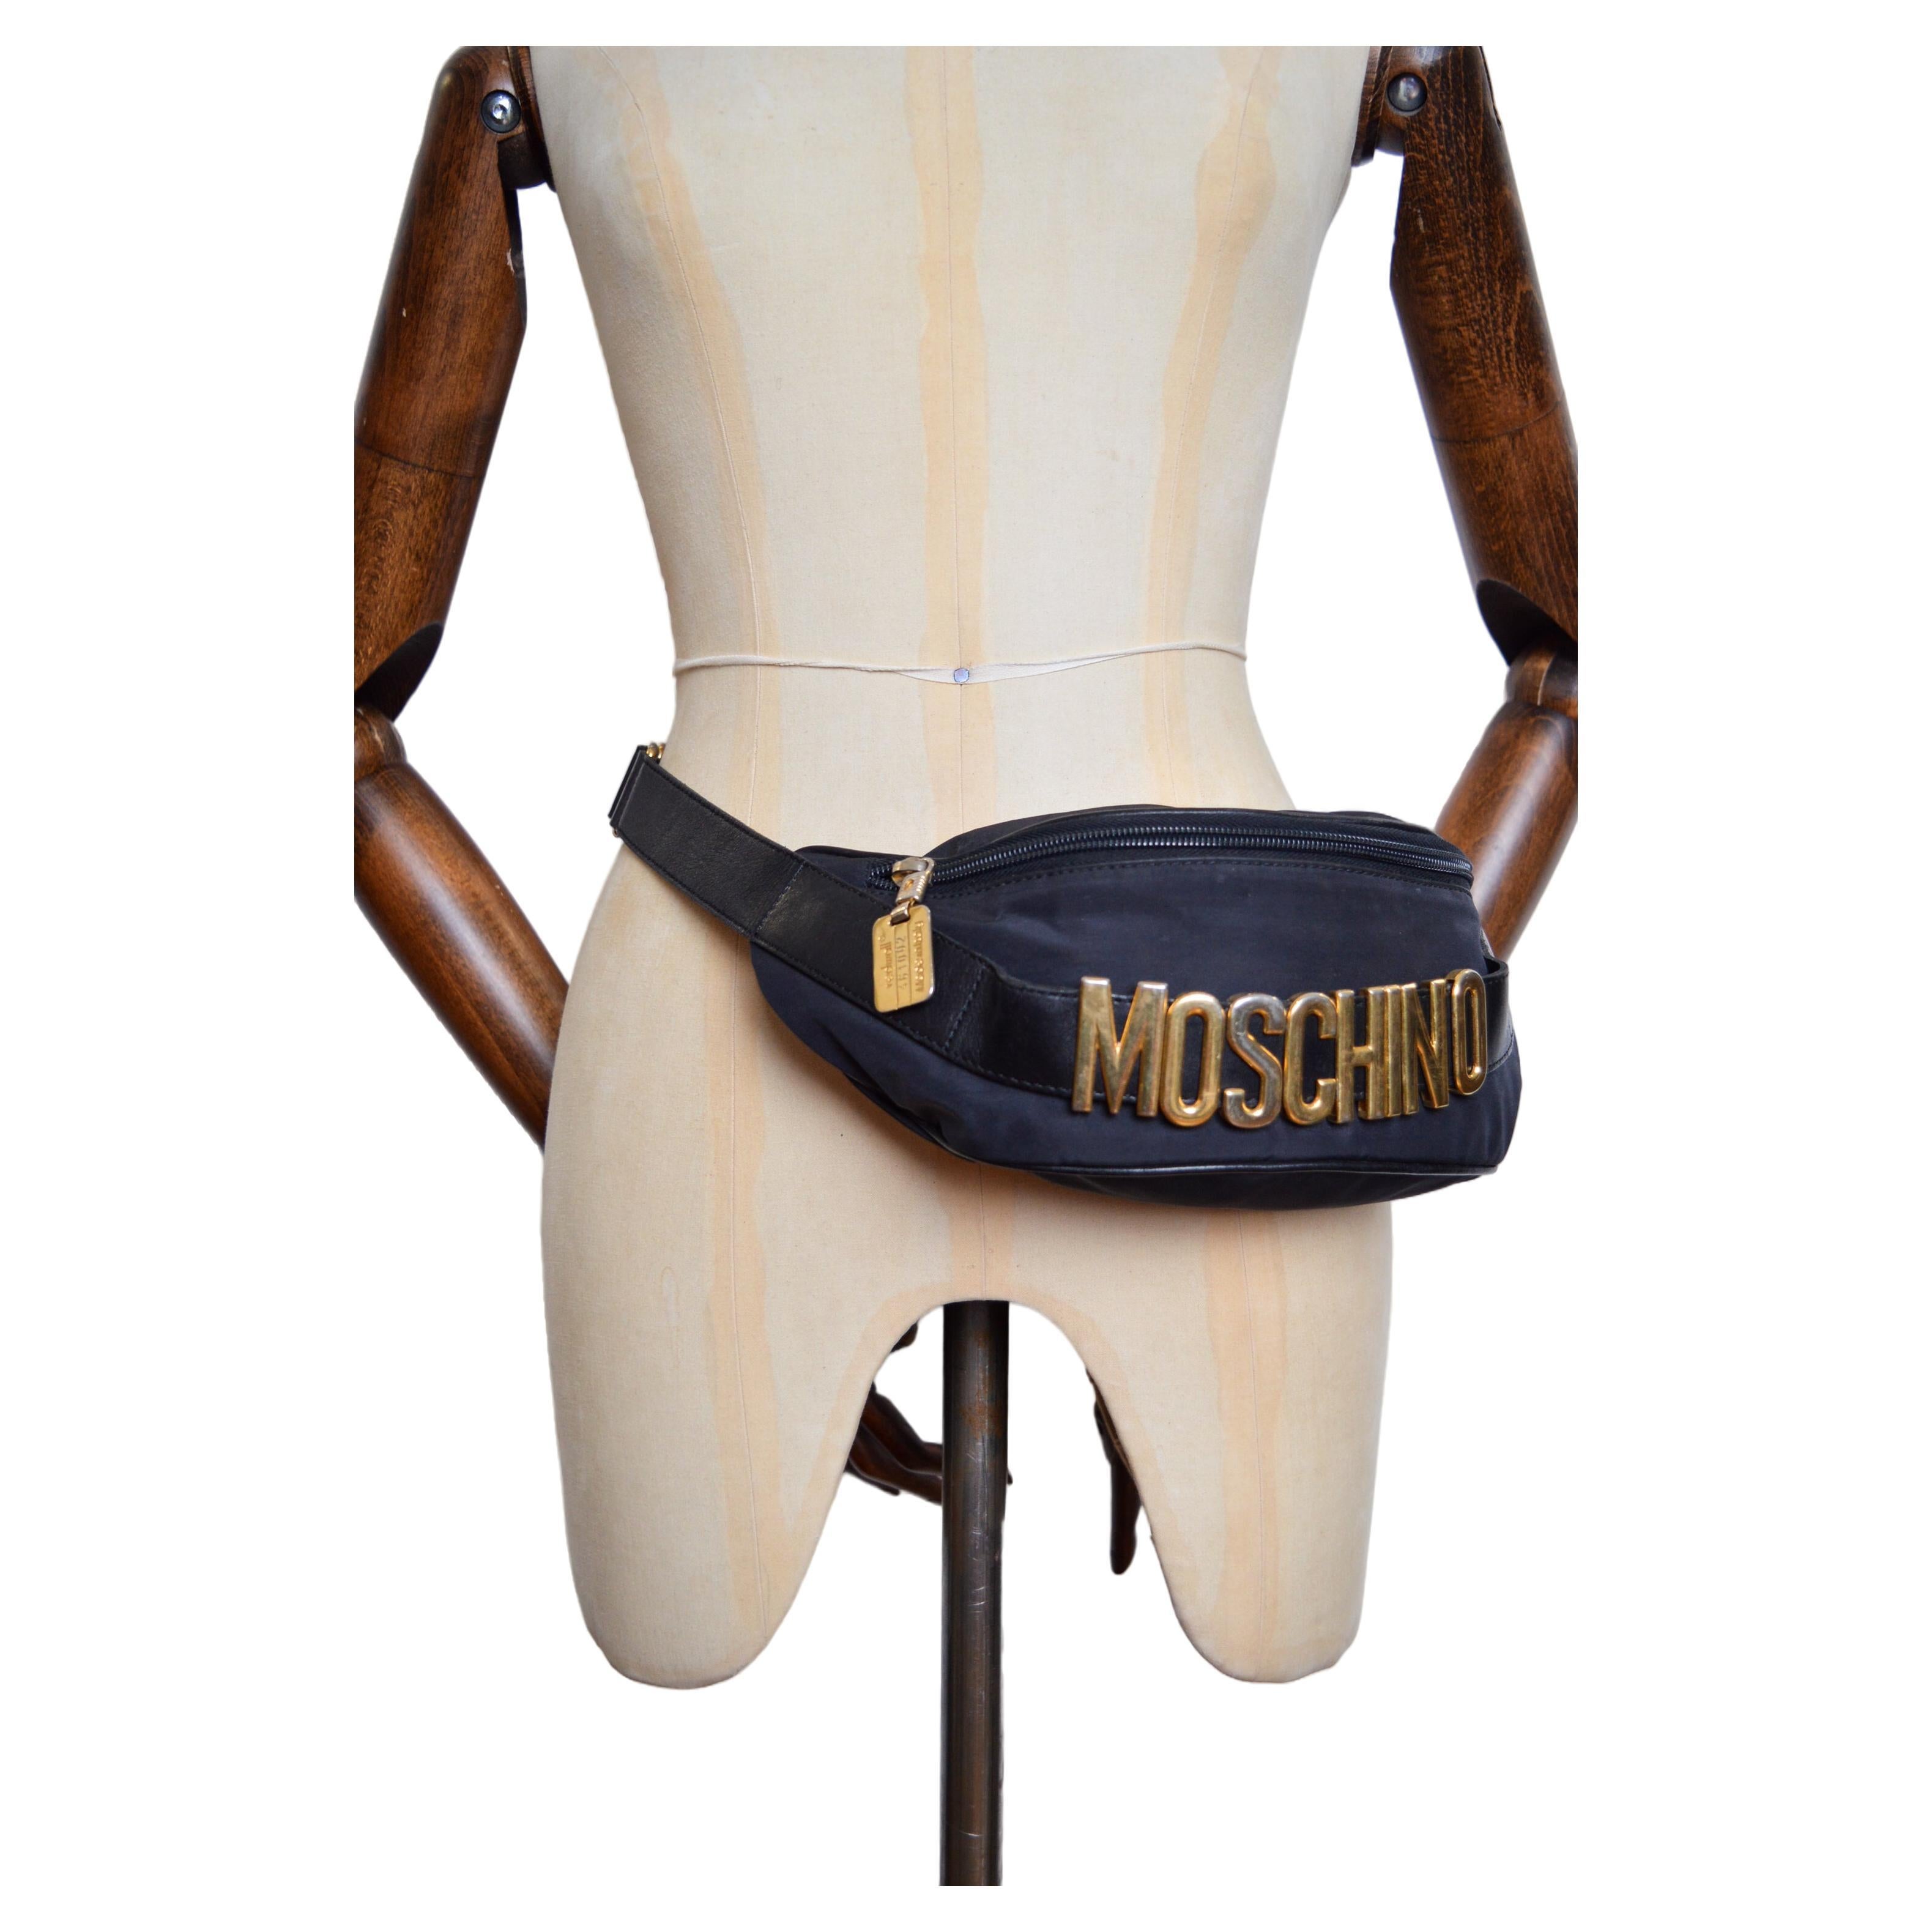 Vintage 1990's Moschino black nylon fanny pack / bum bag, with iconic & large 'MOSCHINO' lettering and gold tone metal hardware.  

An Iconic Vintage Piece !  

MADE IN ITALY  

Features: Large 'MOSCHINO' spellout letters, Single Zip fasten